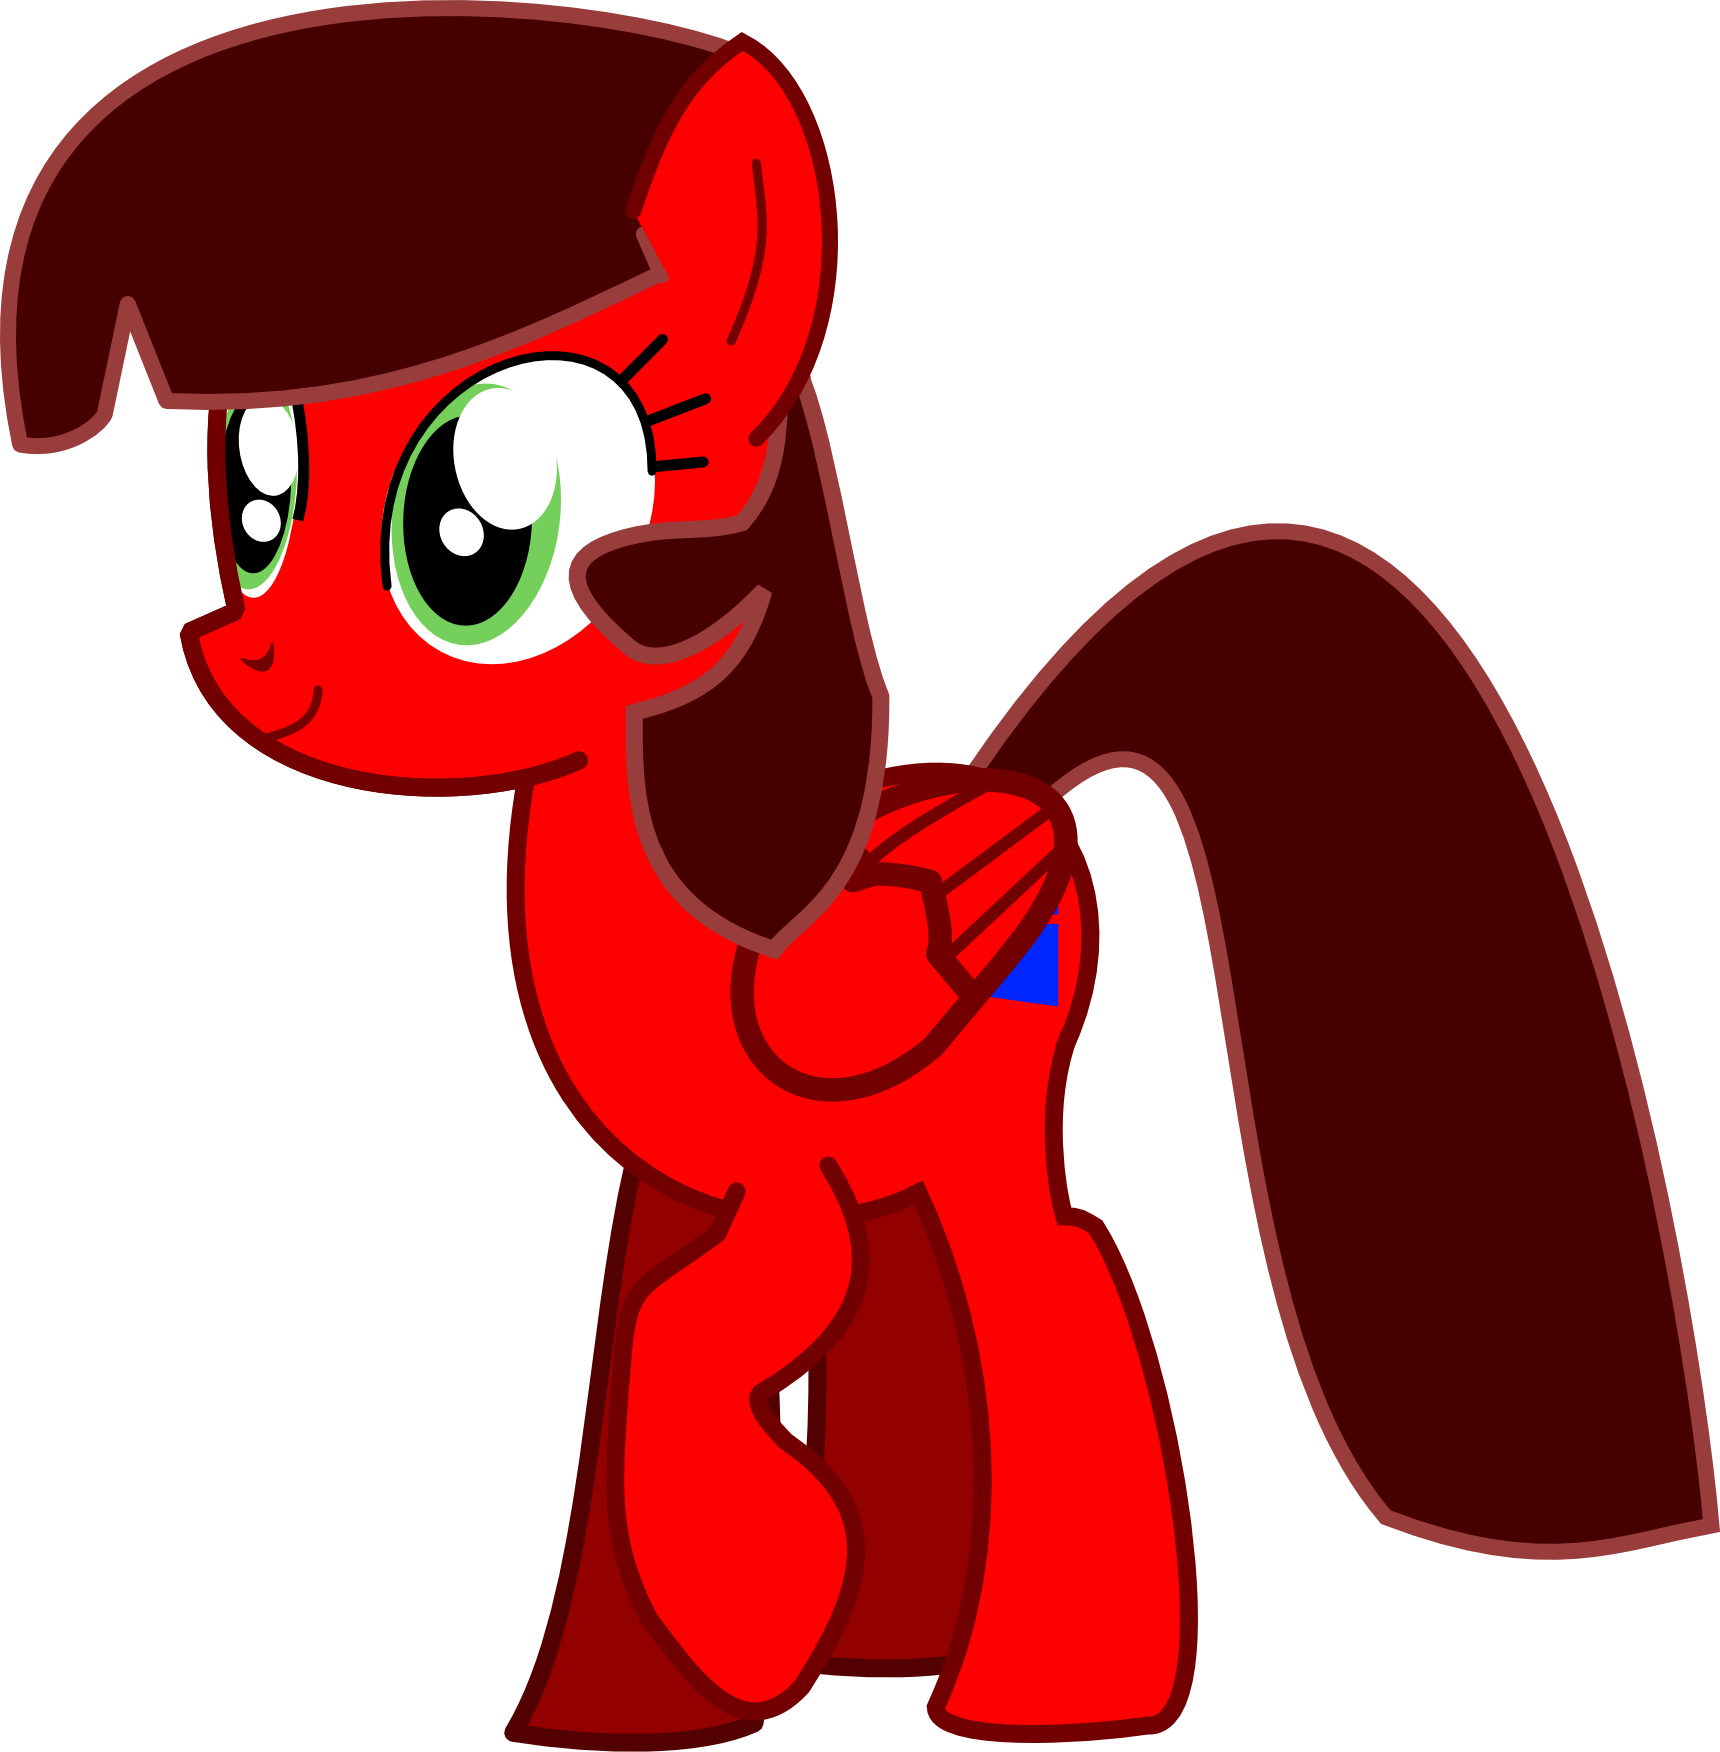 A red horse with green eyes looks off into nowhere. Her front left hoof is slight up off the ground. It's less obvious she's a twilight sparkle recolor, but not by much.